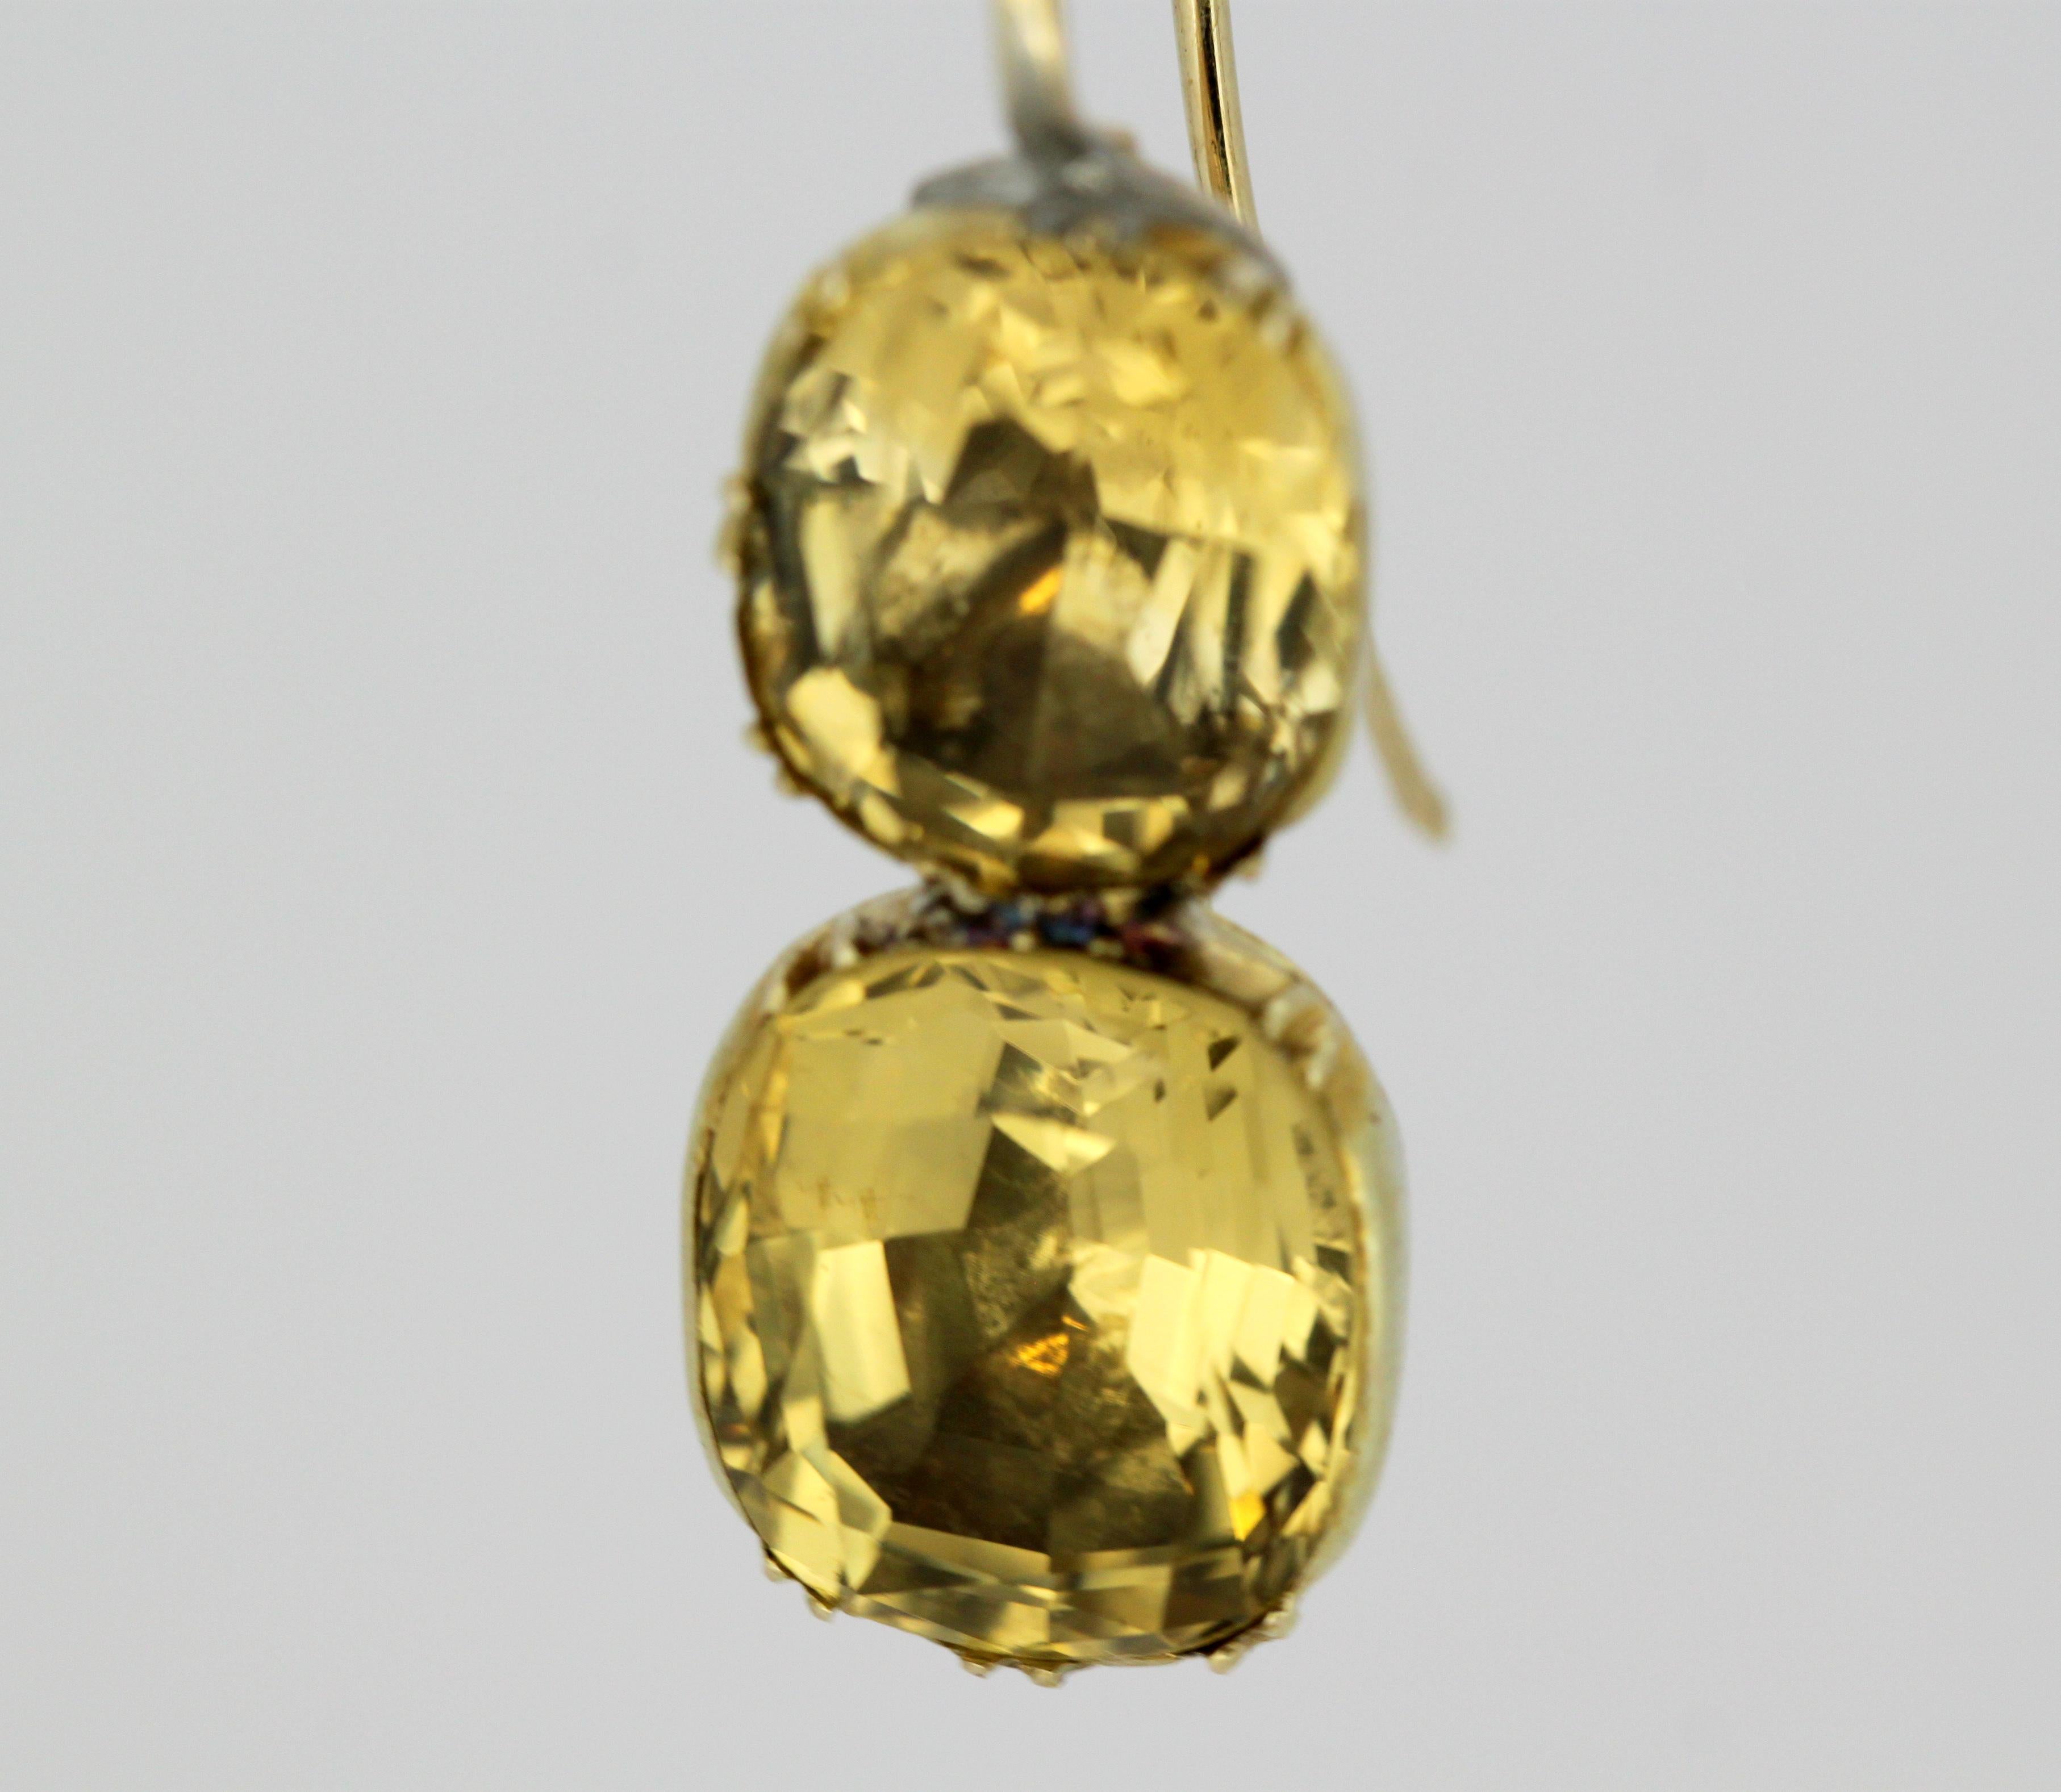 Women's Antique Victorian 15 Karat Gold Earrings with Natural Citrine, 1850s